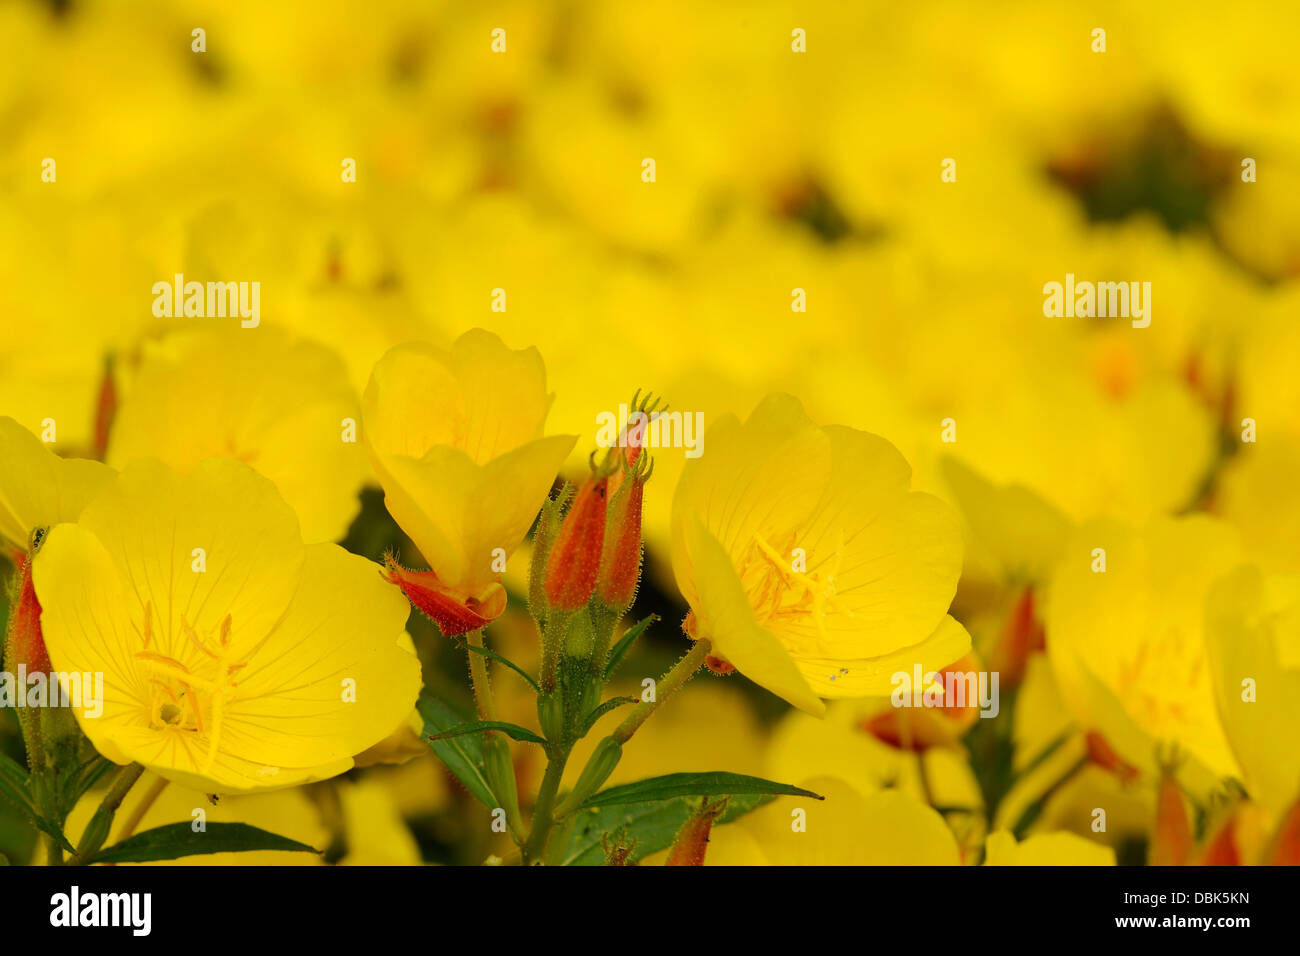 Oenothera is a genus of about 125 species of herbaceous flowering plants. Stock Photo